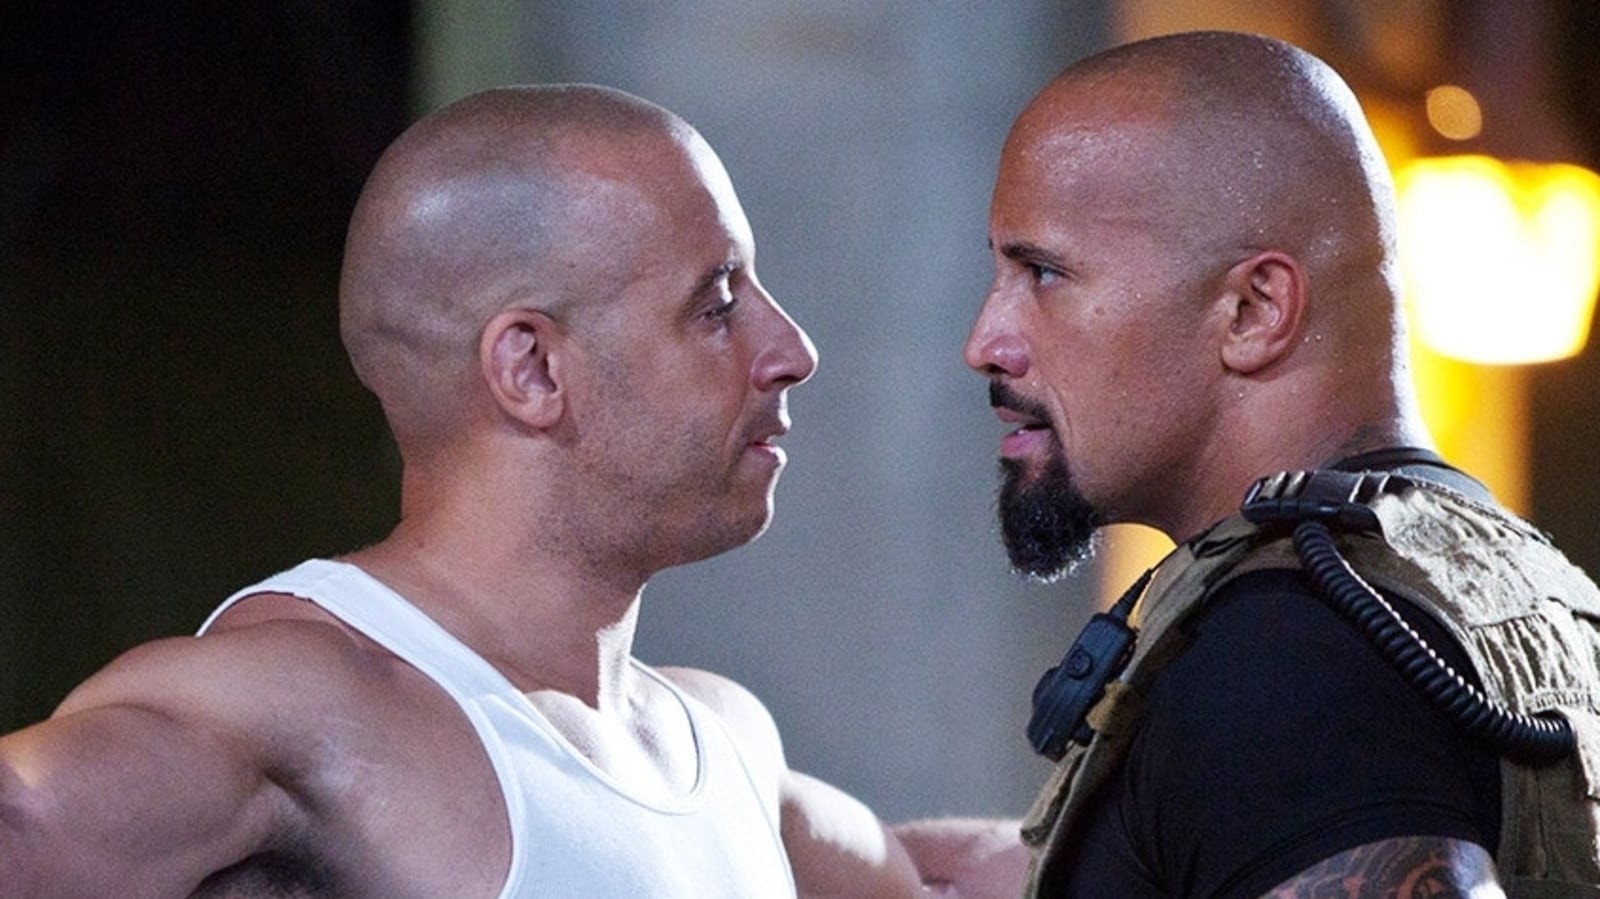 Dwayne Johnson And Vin Diesel from fast and the furious